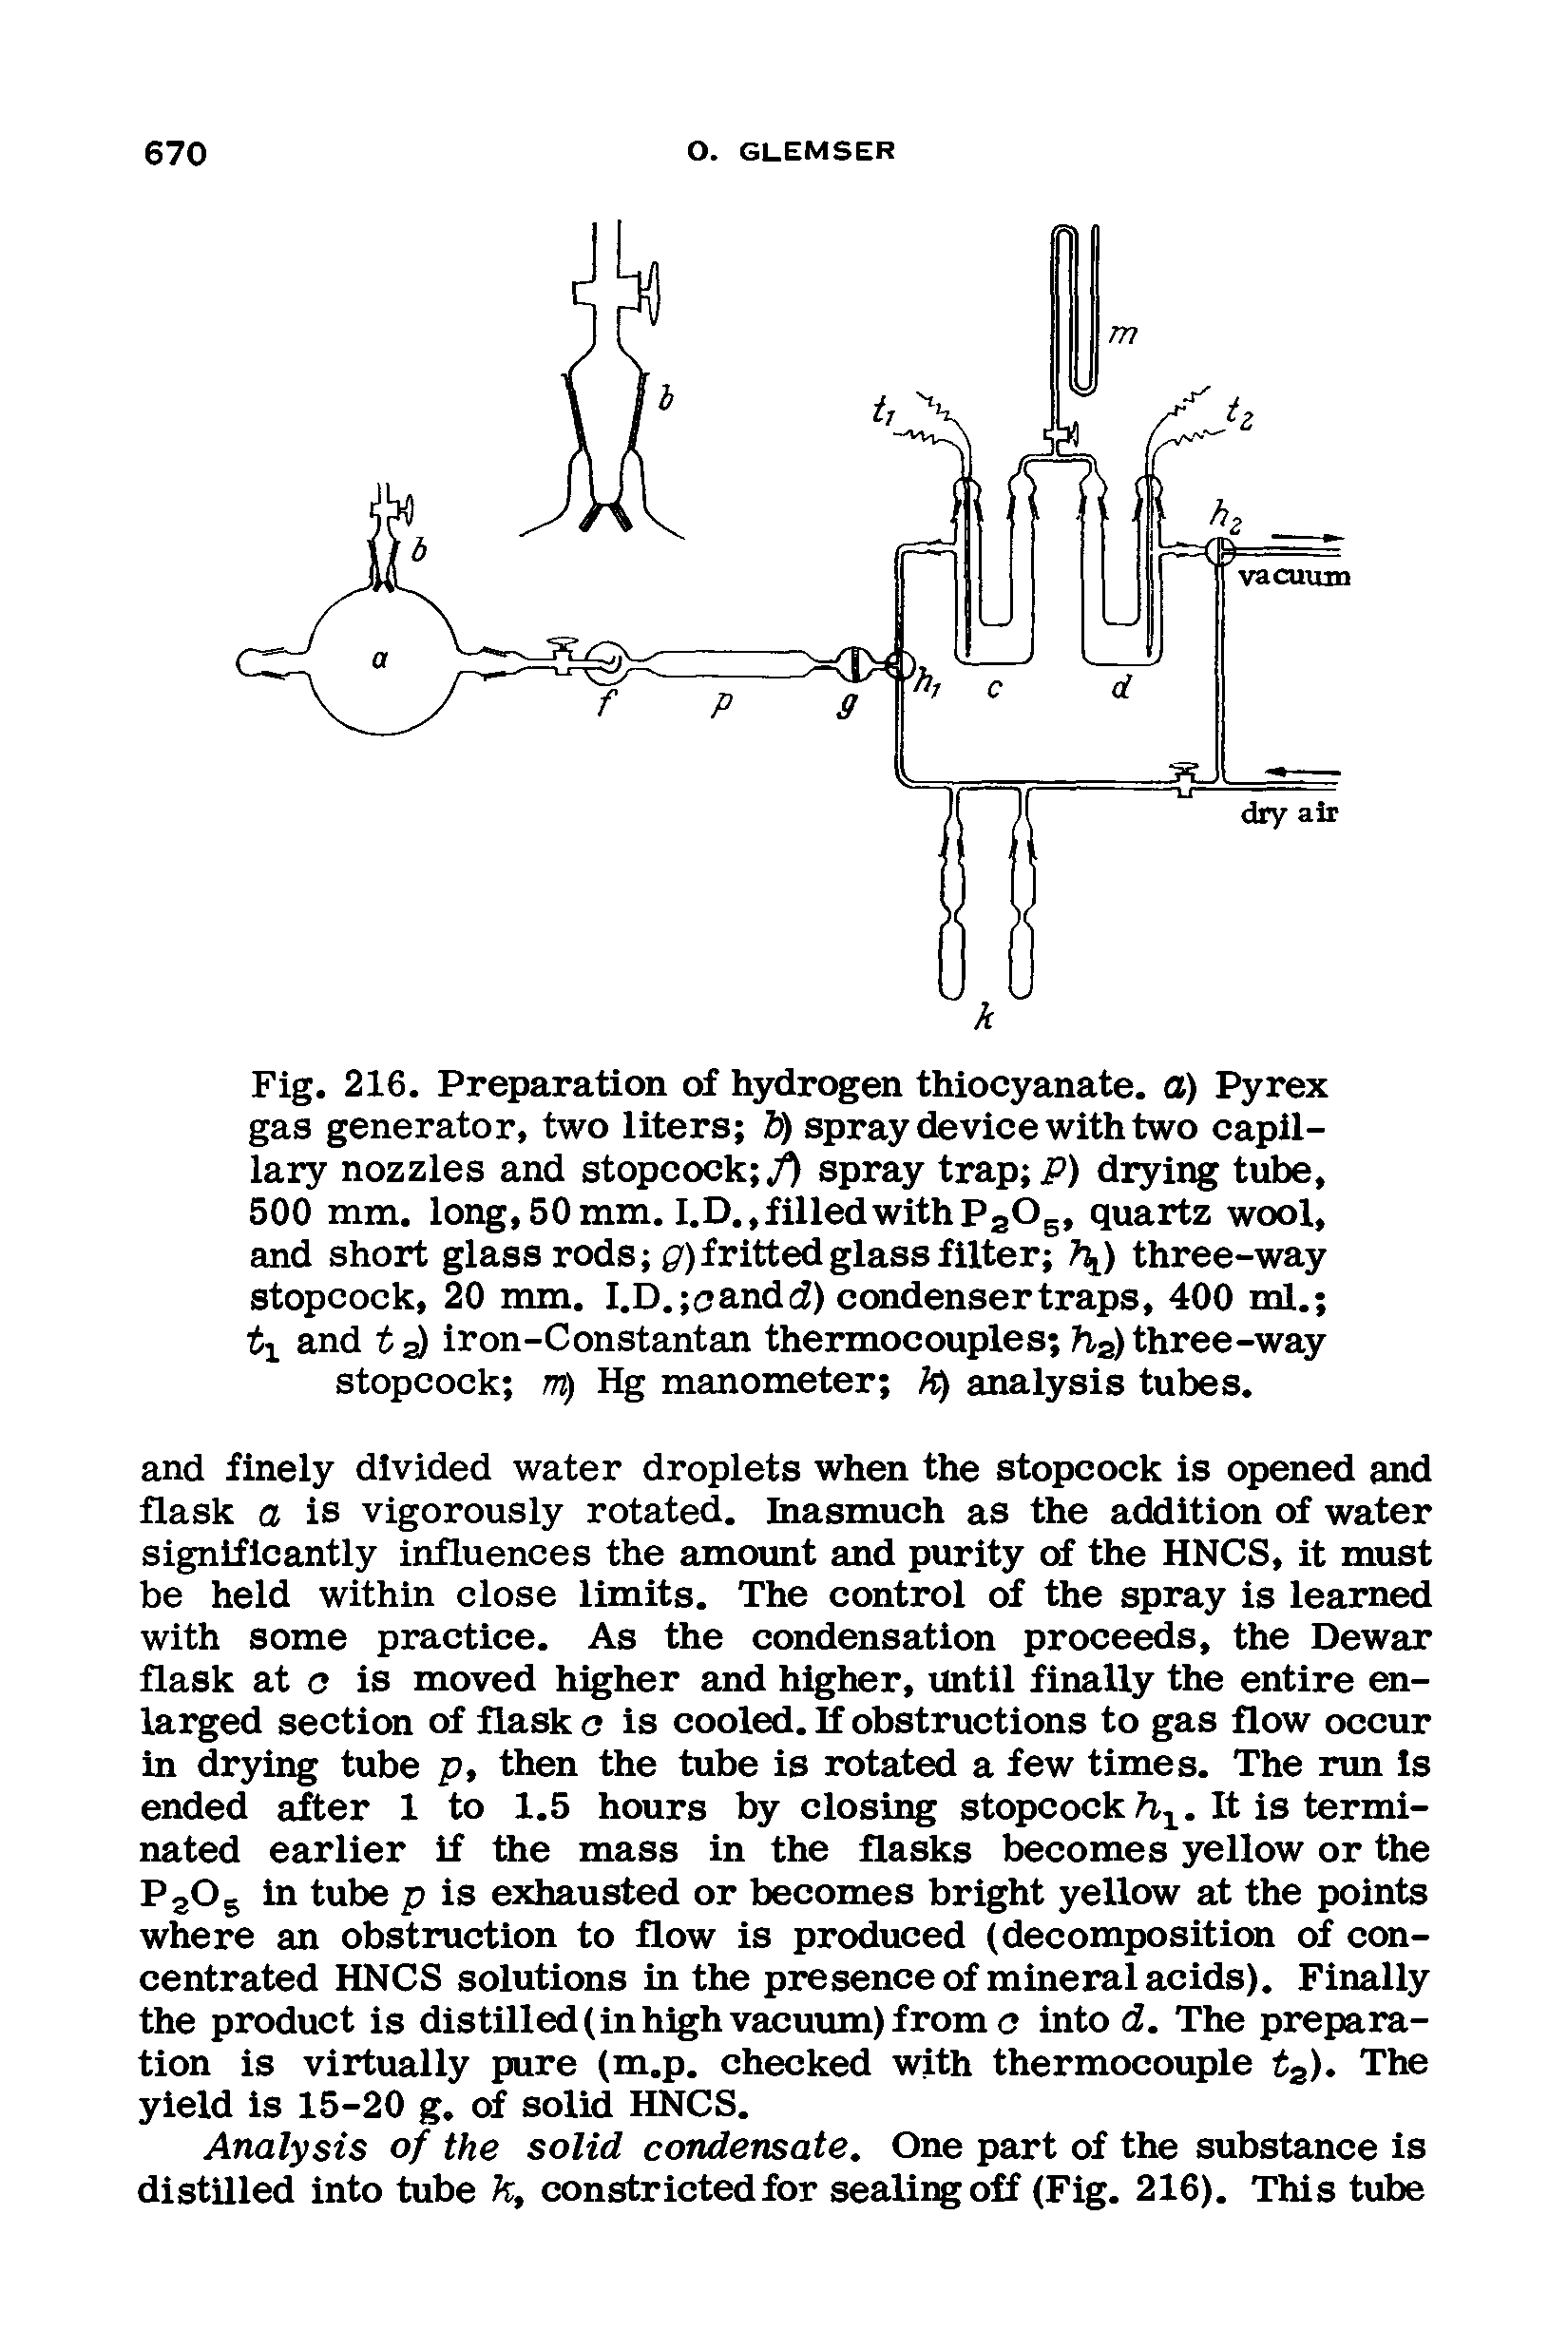 Fig. 216. Preparation of hydrogen thiocyanate, o) Pyrex gas generator, two liters ft) spray device with two capillary nozzles and stopcock . spray trap P) dryii tube,...